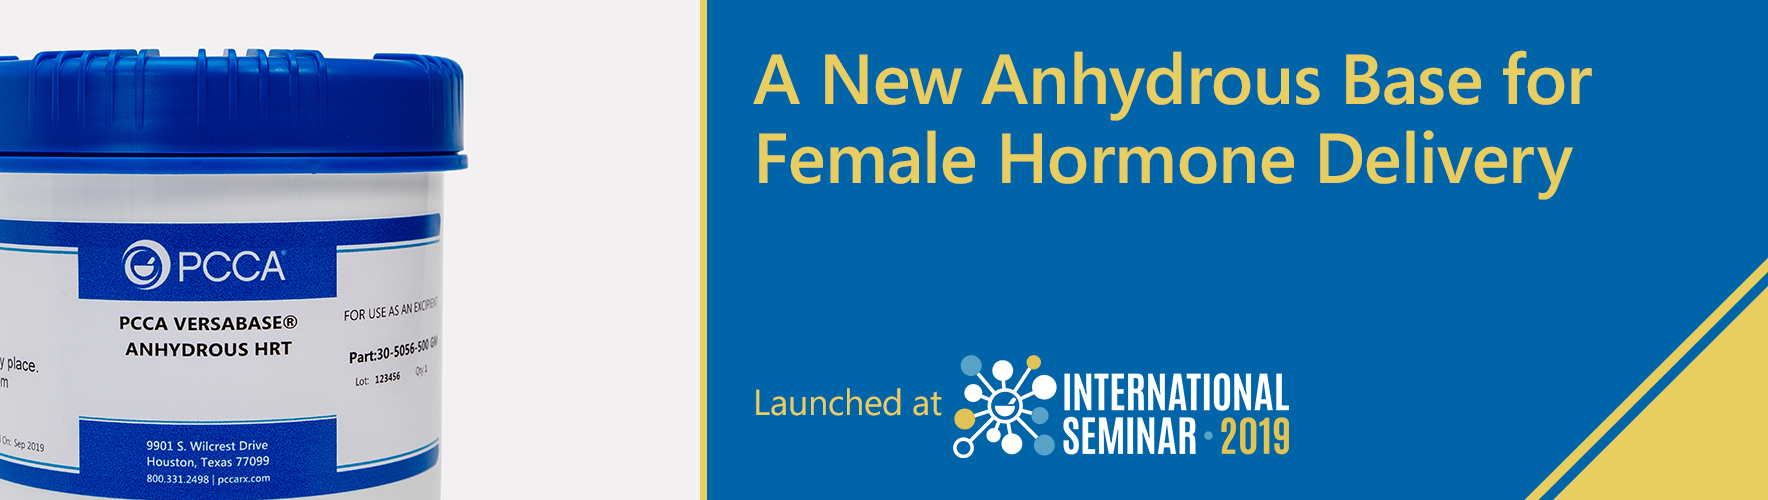 A_New_Anhydrous_Base_for_Female_Hormone_Delivery.png